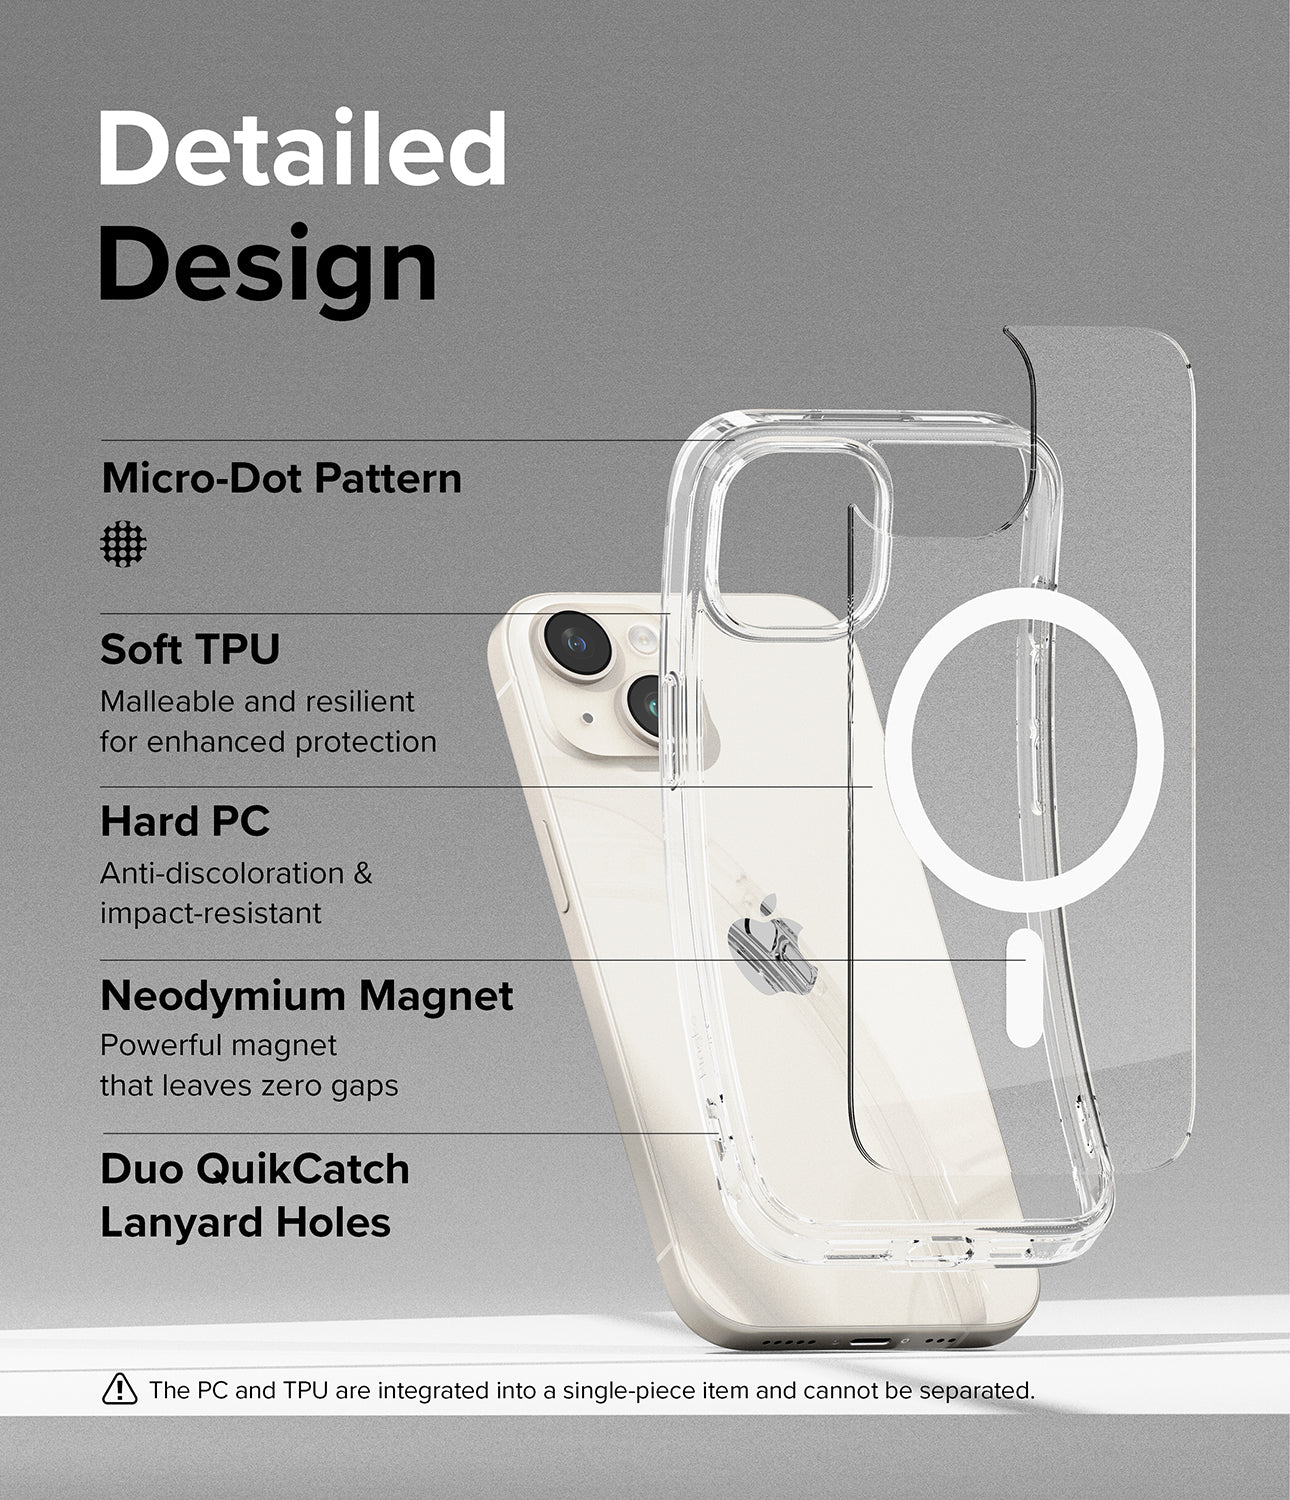 iPhone 15 Case | Fusion Magnetic - Detailed Design. Micro-Dot Pattern. Malleable and resilient for enhanced protection with Soft TPU. Anti-discoloration and impact-resistant with Hard PC. Powerful Neodymium Magnet that leaves zero gaps. Duo QuikCatch Lanyard Holes.